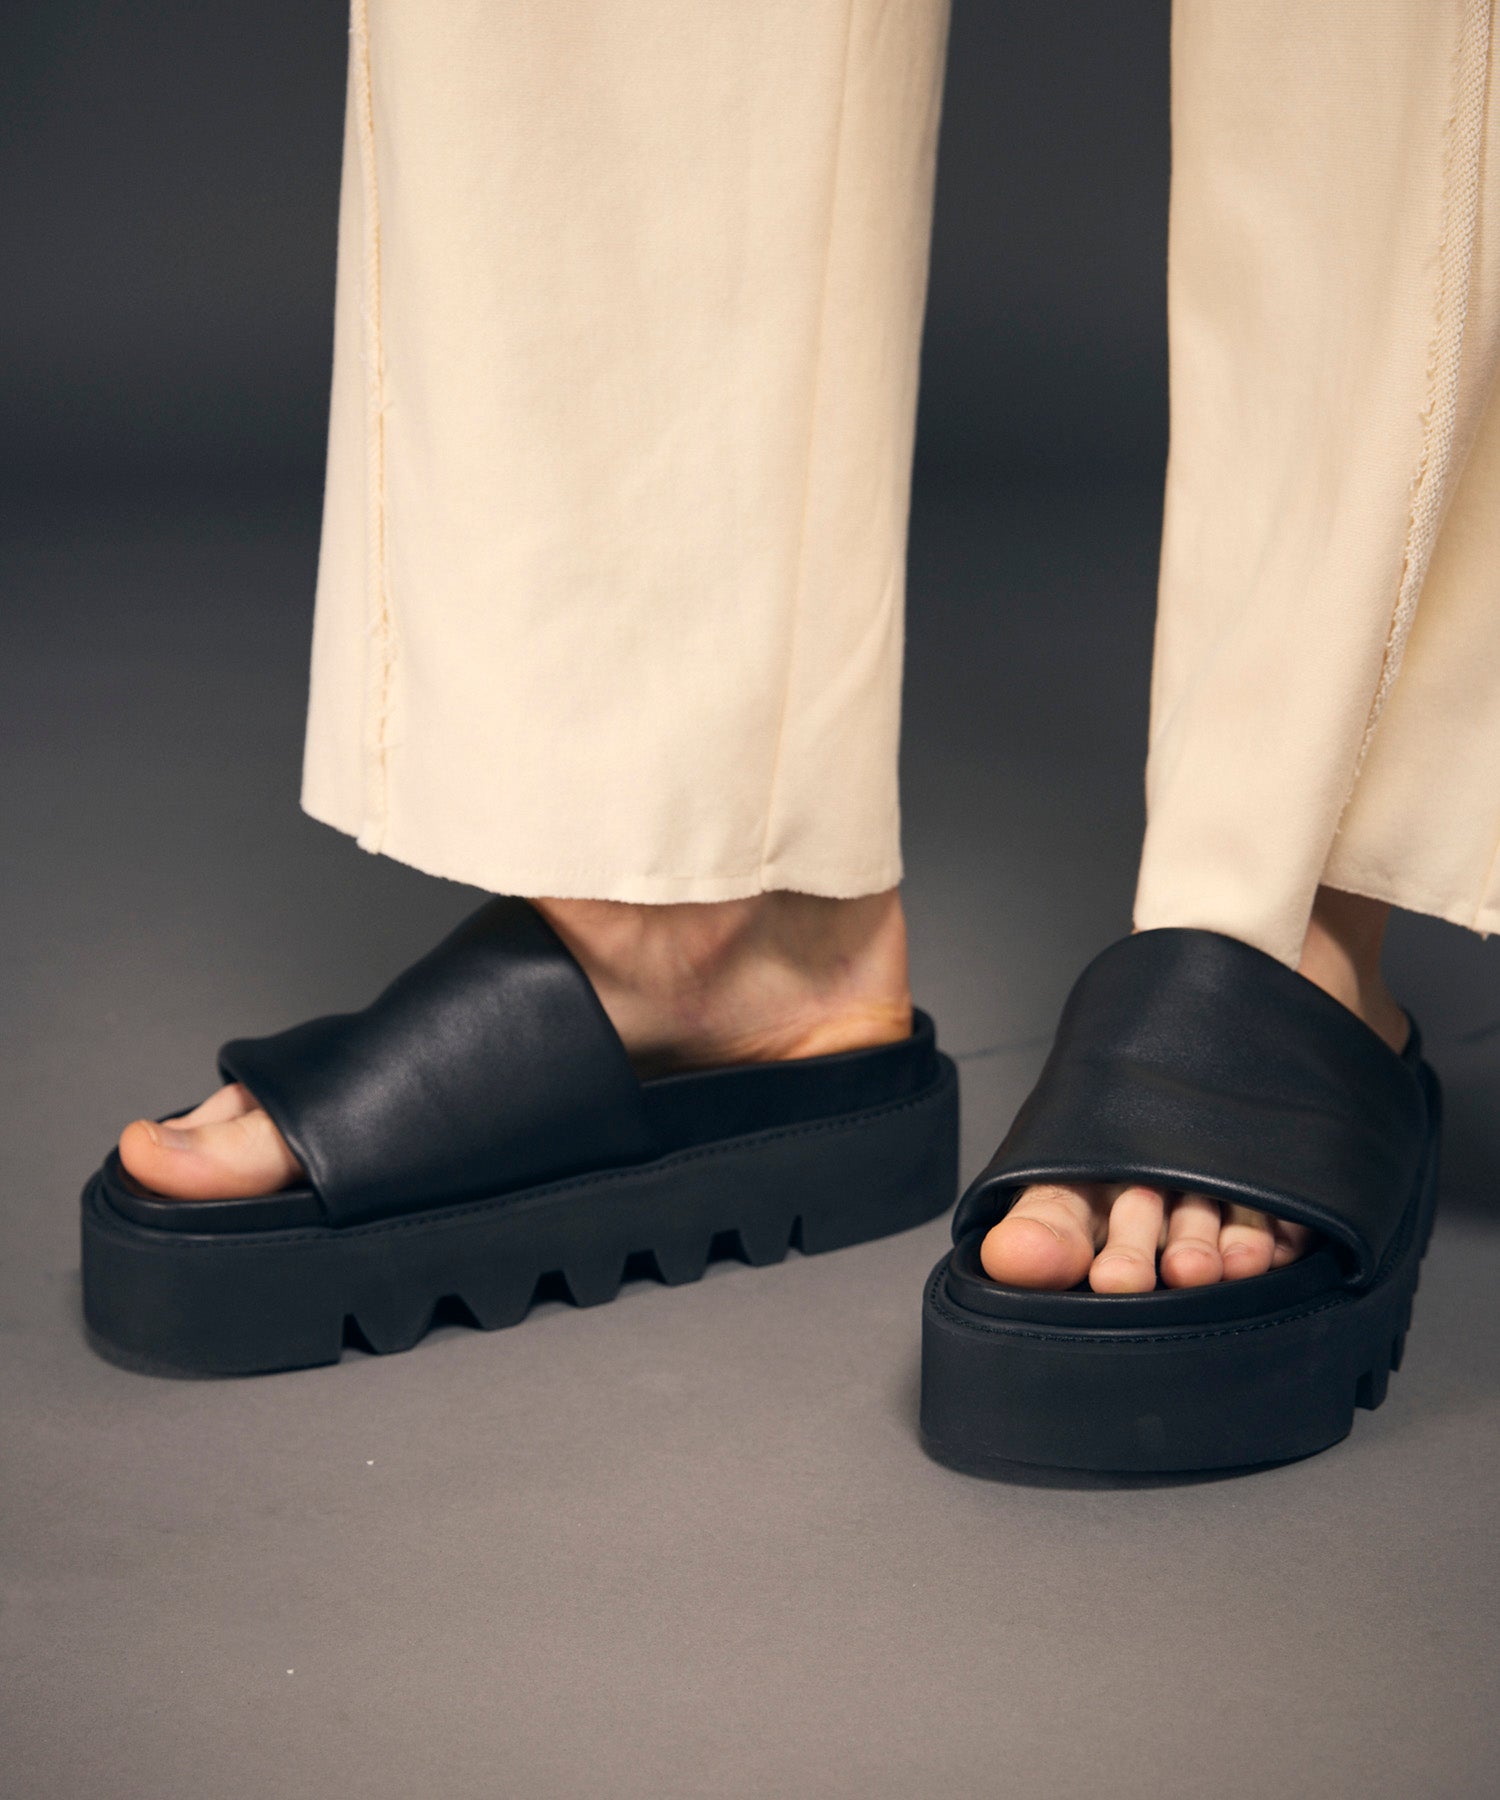 [Special SHOES FACTORY COLLABORATION] Tank Sole Shower Sandal Made in Tokyo